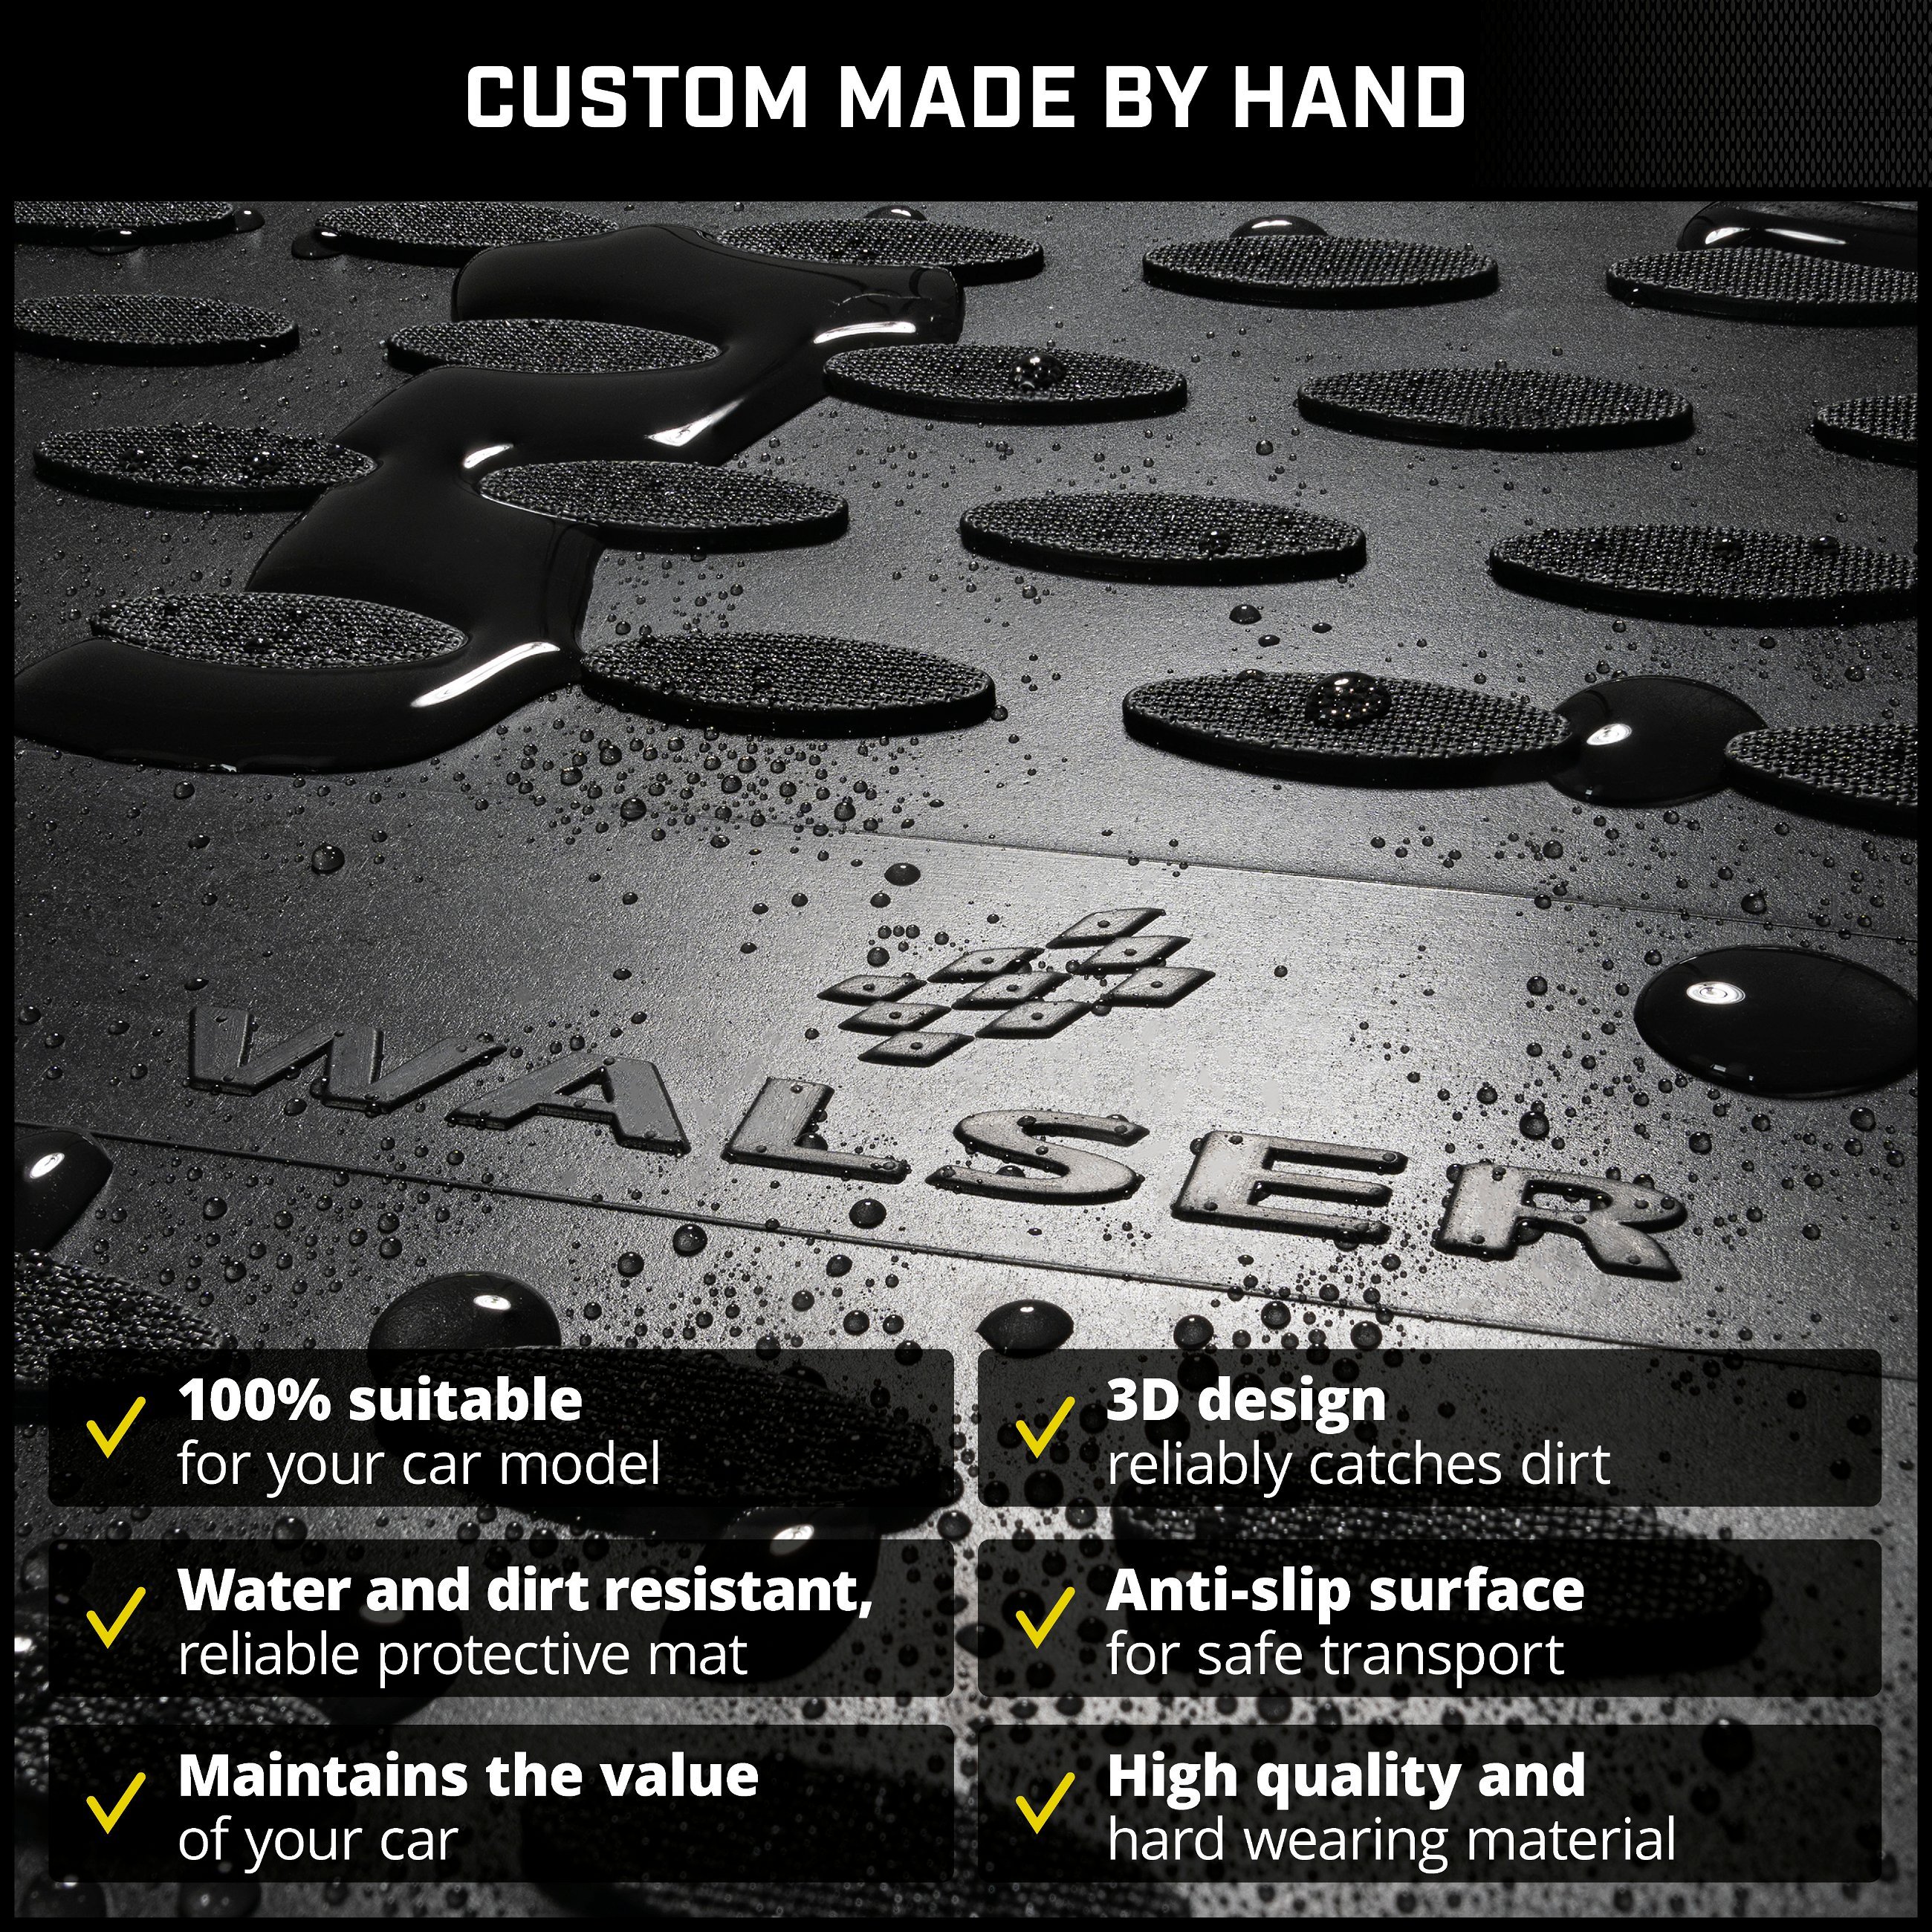 XTR Rubber Mats for Dacia Dokker 11/2012-Today